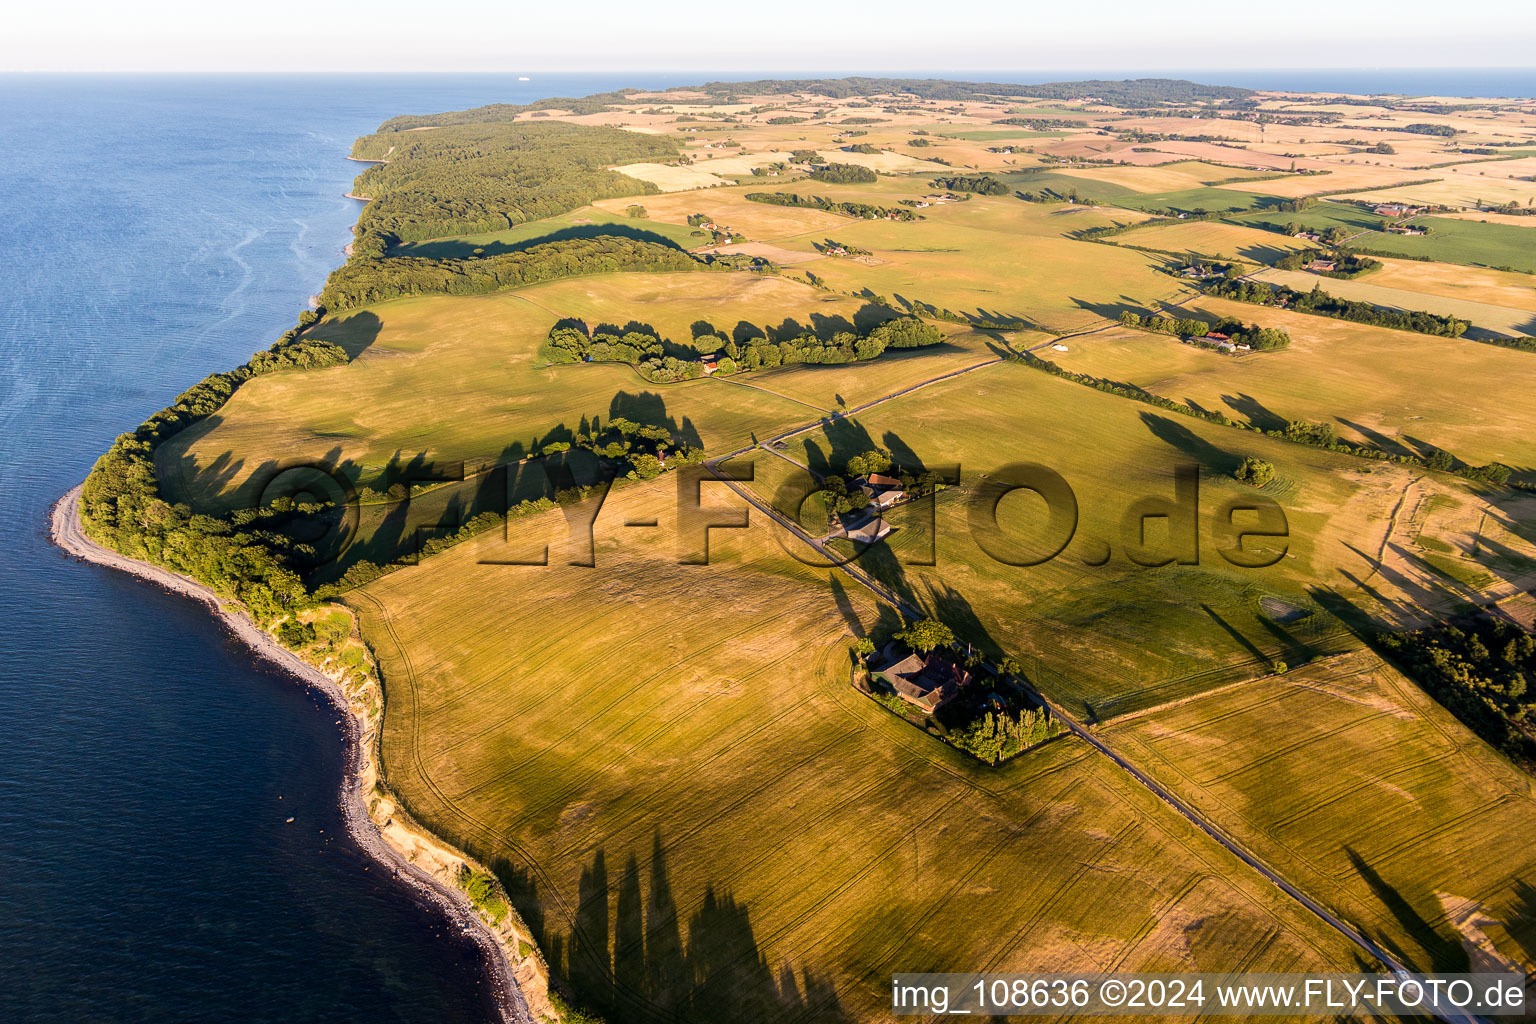 Fields and Forests of Moens Klint on the high shores of the Baltic sea in Borre in Region Sjaelland, Denmark